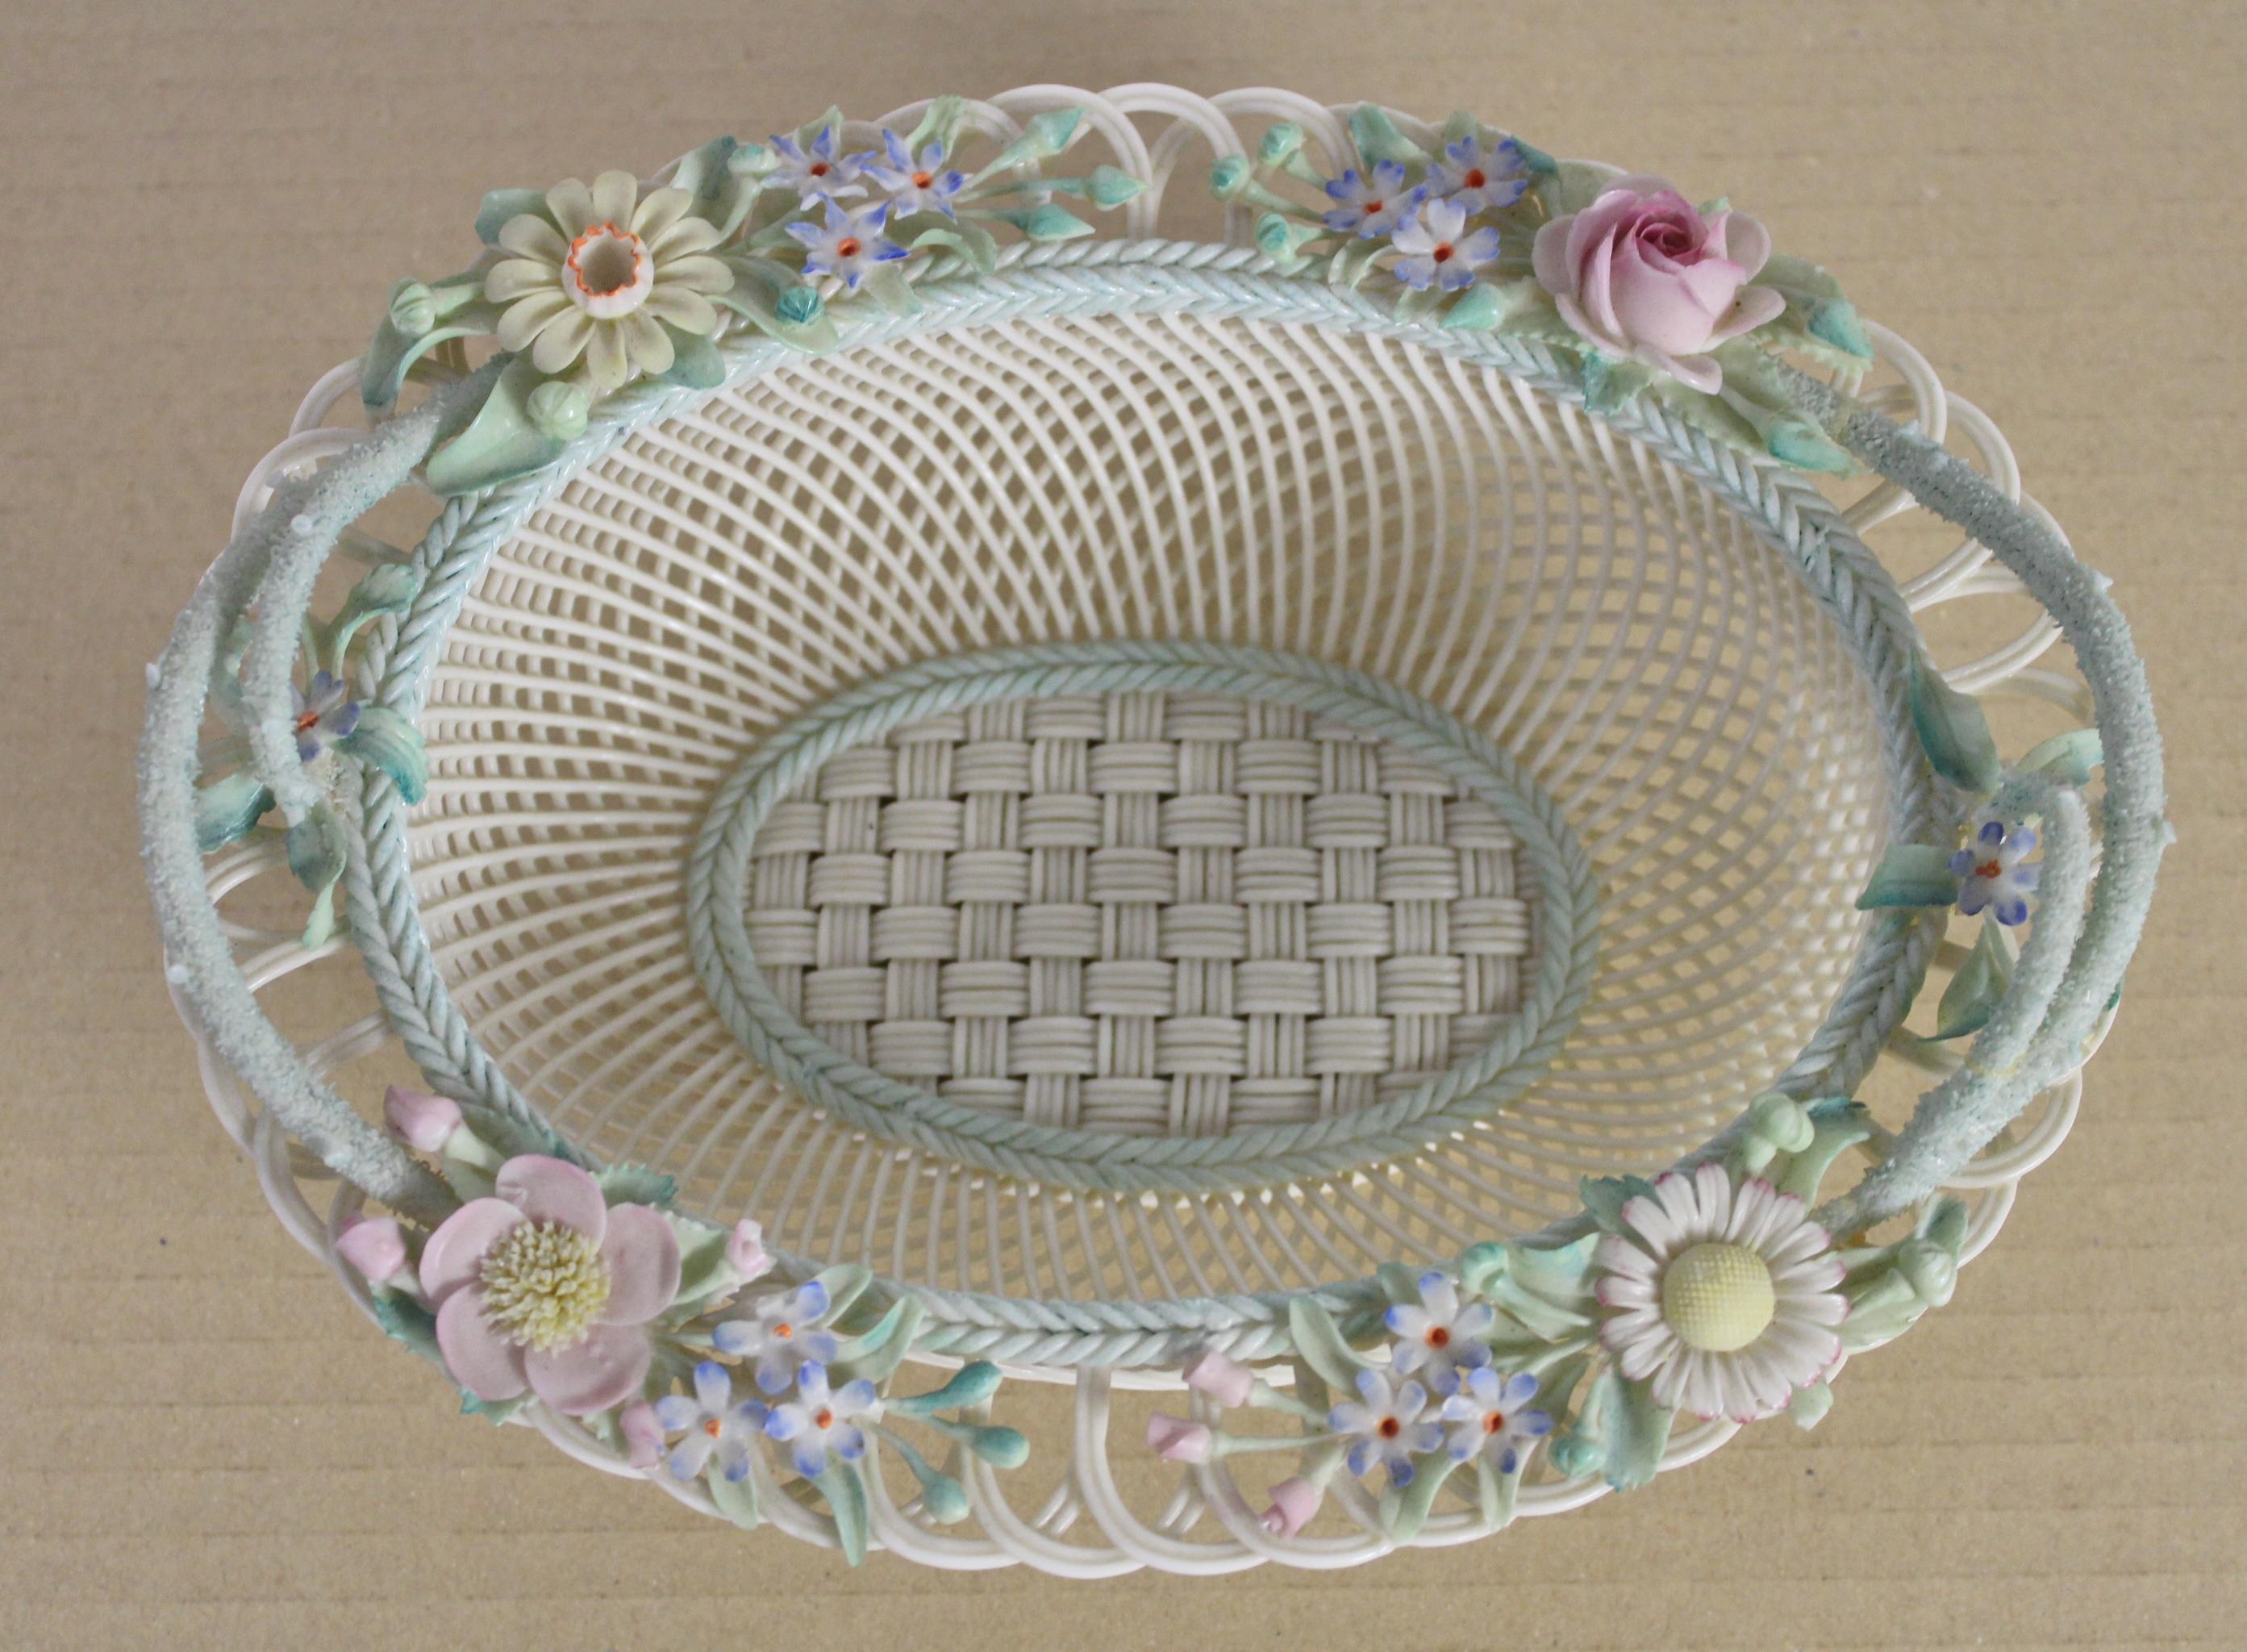 Irish Late 19th Century Large Belleek Floral Decorated Porcelain Basket For Sale